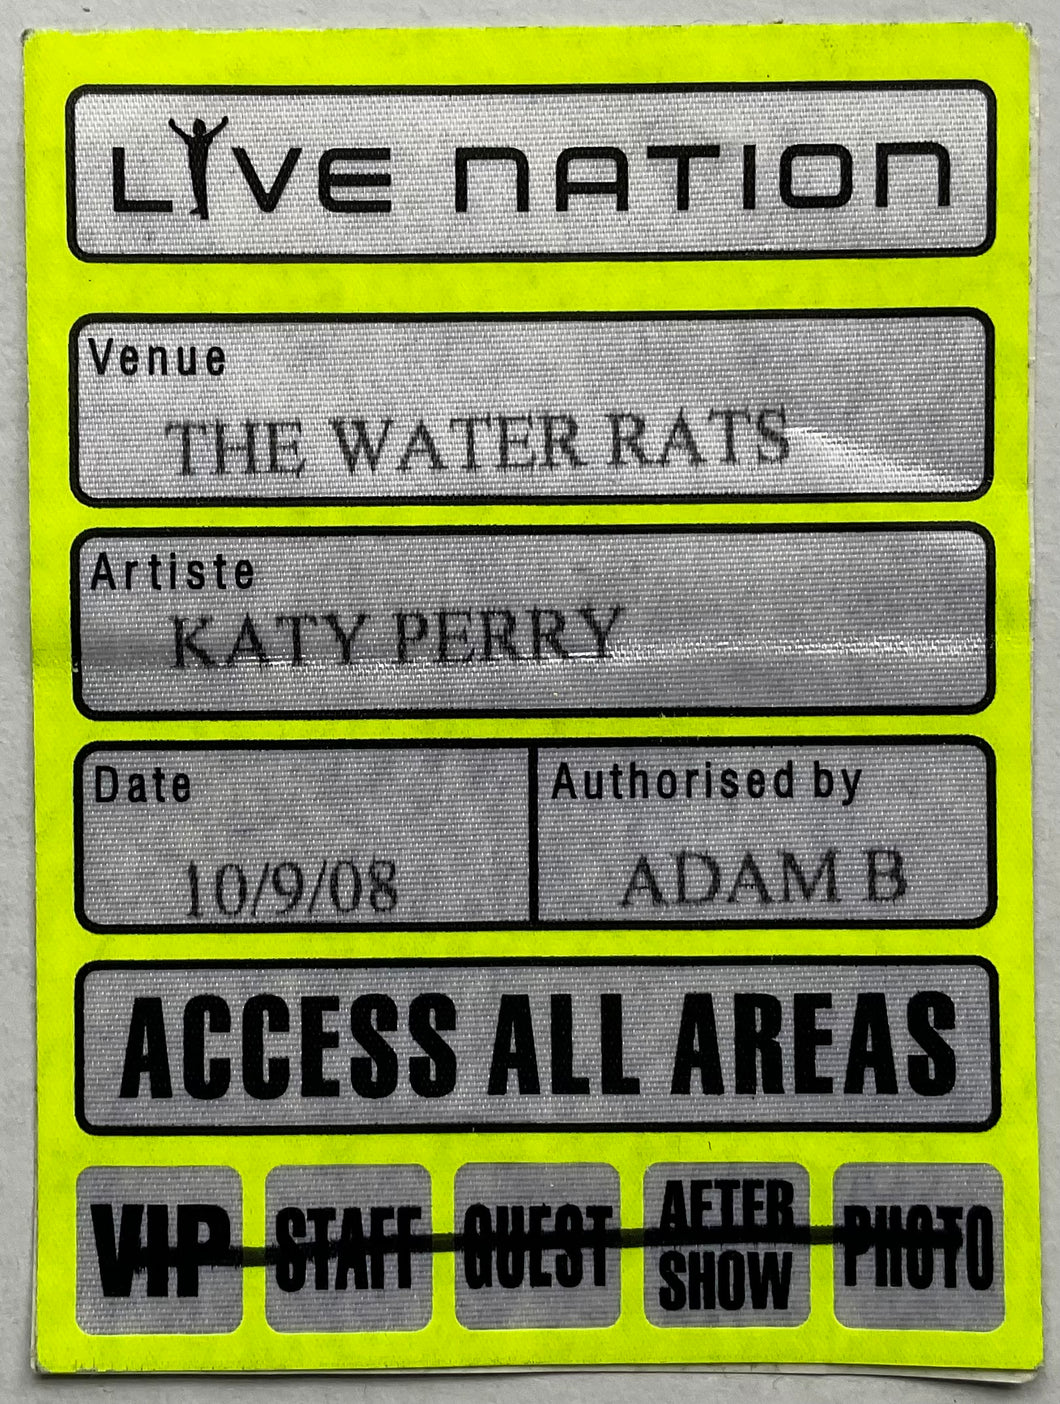 Katy Perry Original Unused Concert Backstage Pass Ticket Water Rats London 10th Sep 2008